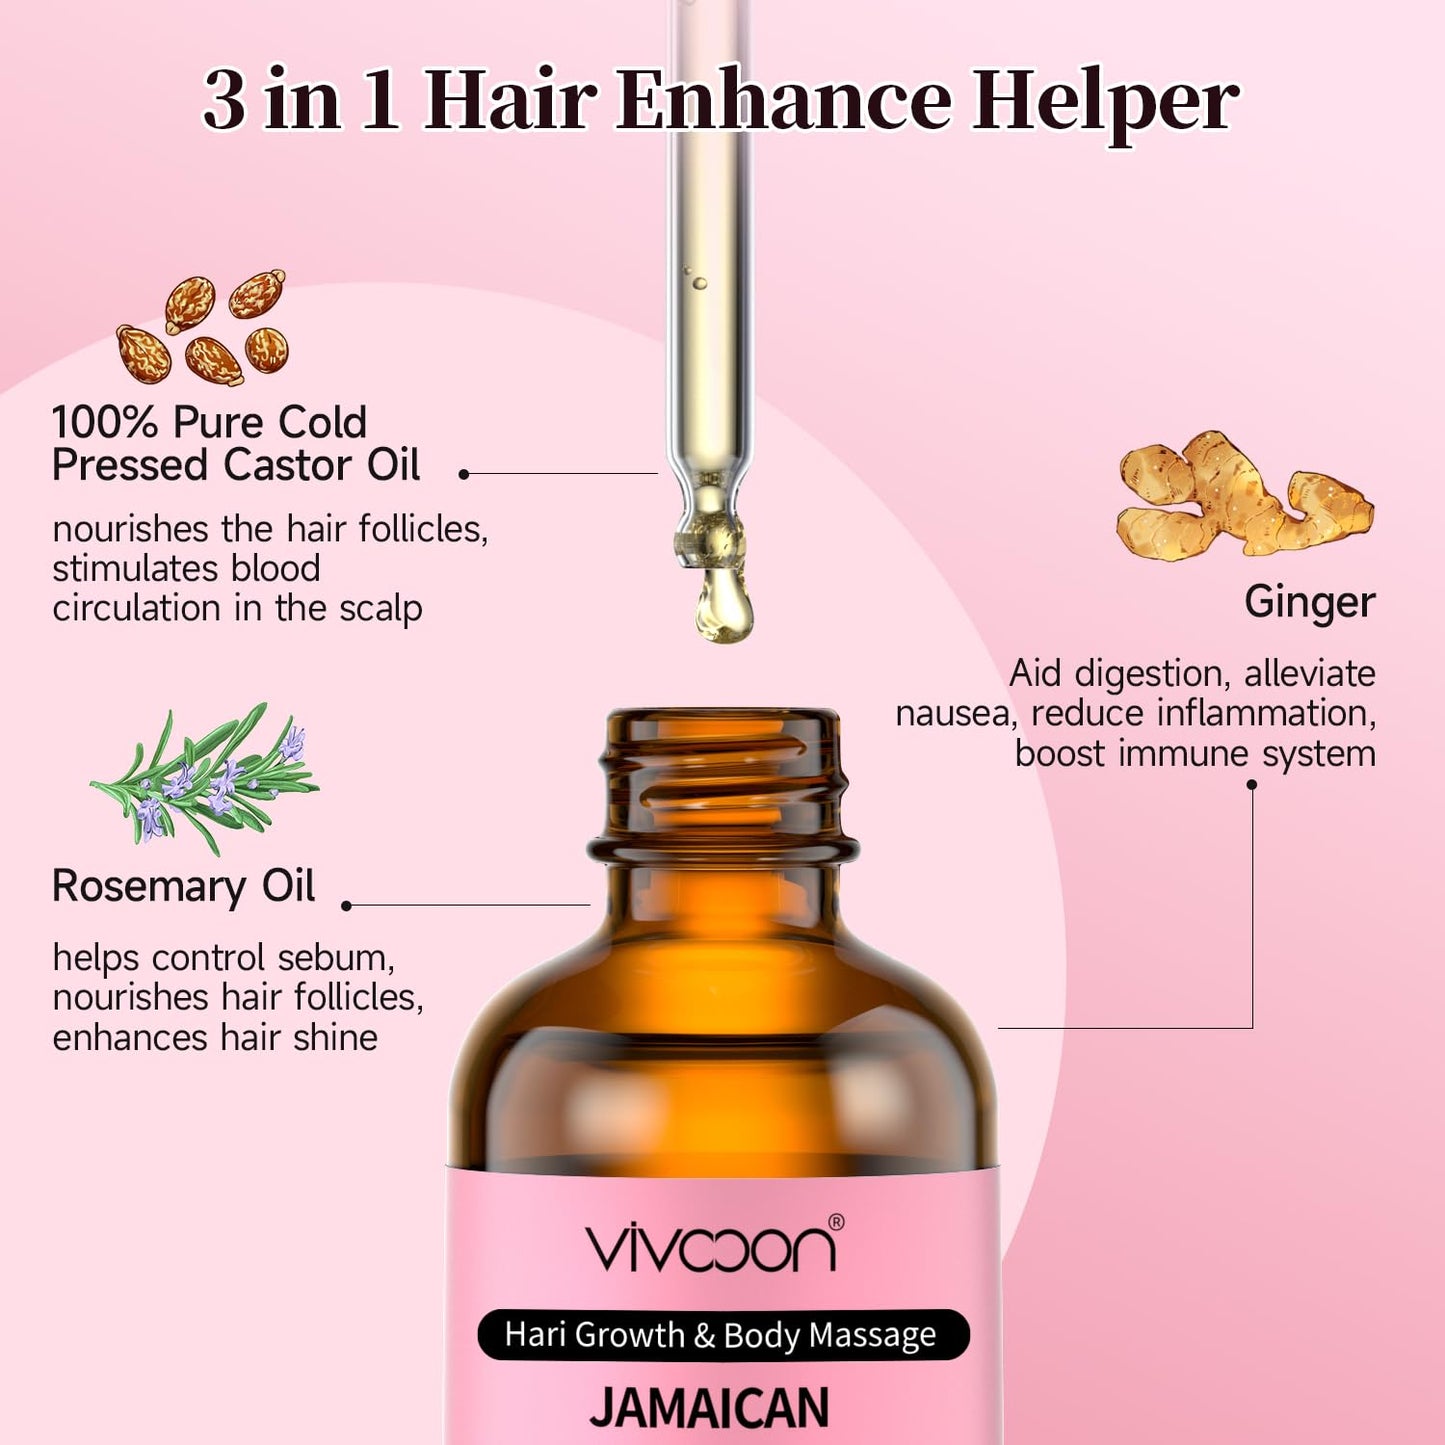 Vivccon Jamaican Black Castor Oil with Rosemary, Black Castor Oil Cold Pressed, Organic Castor Oil for Hair Growth, Eyelashes and Eyebrows Growth, Castor Oil 100% Natural & Pure